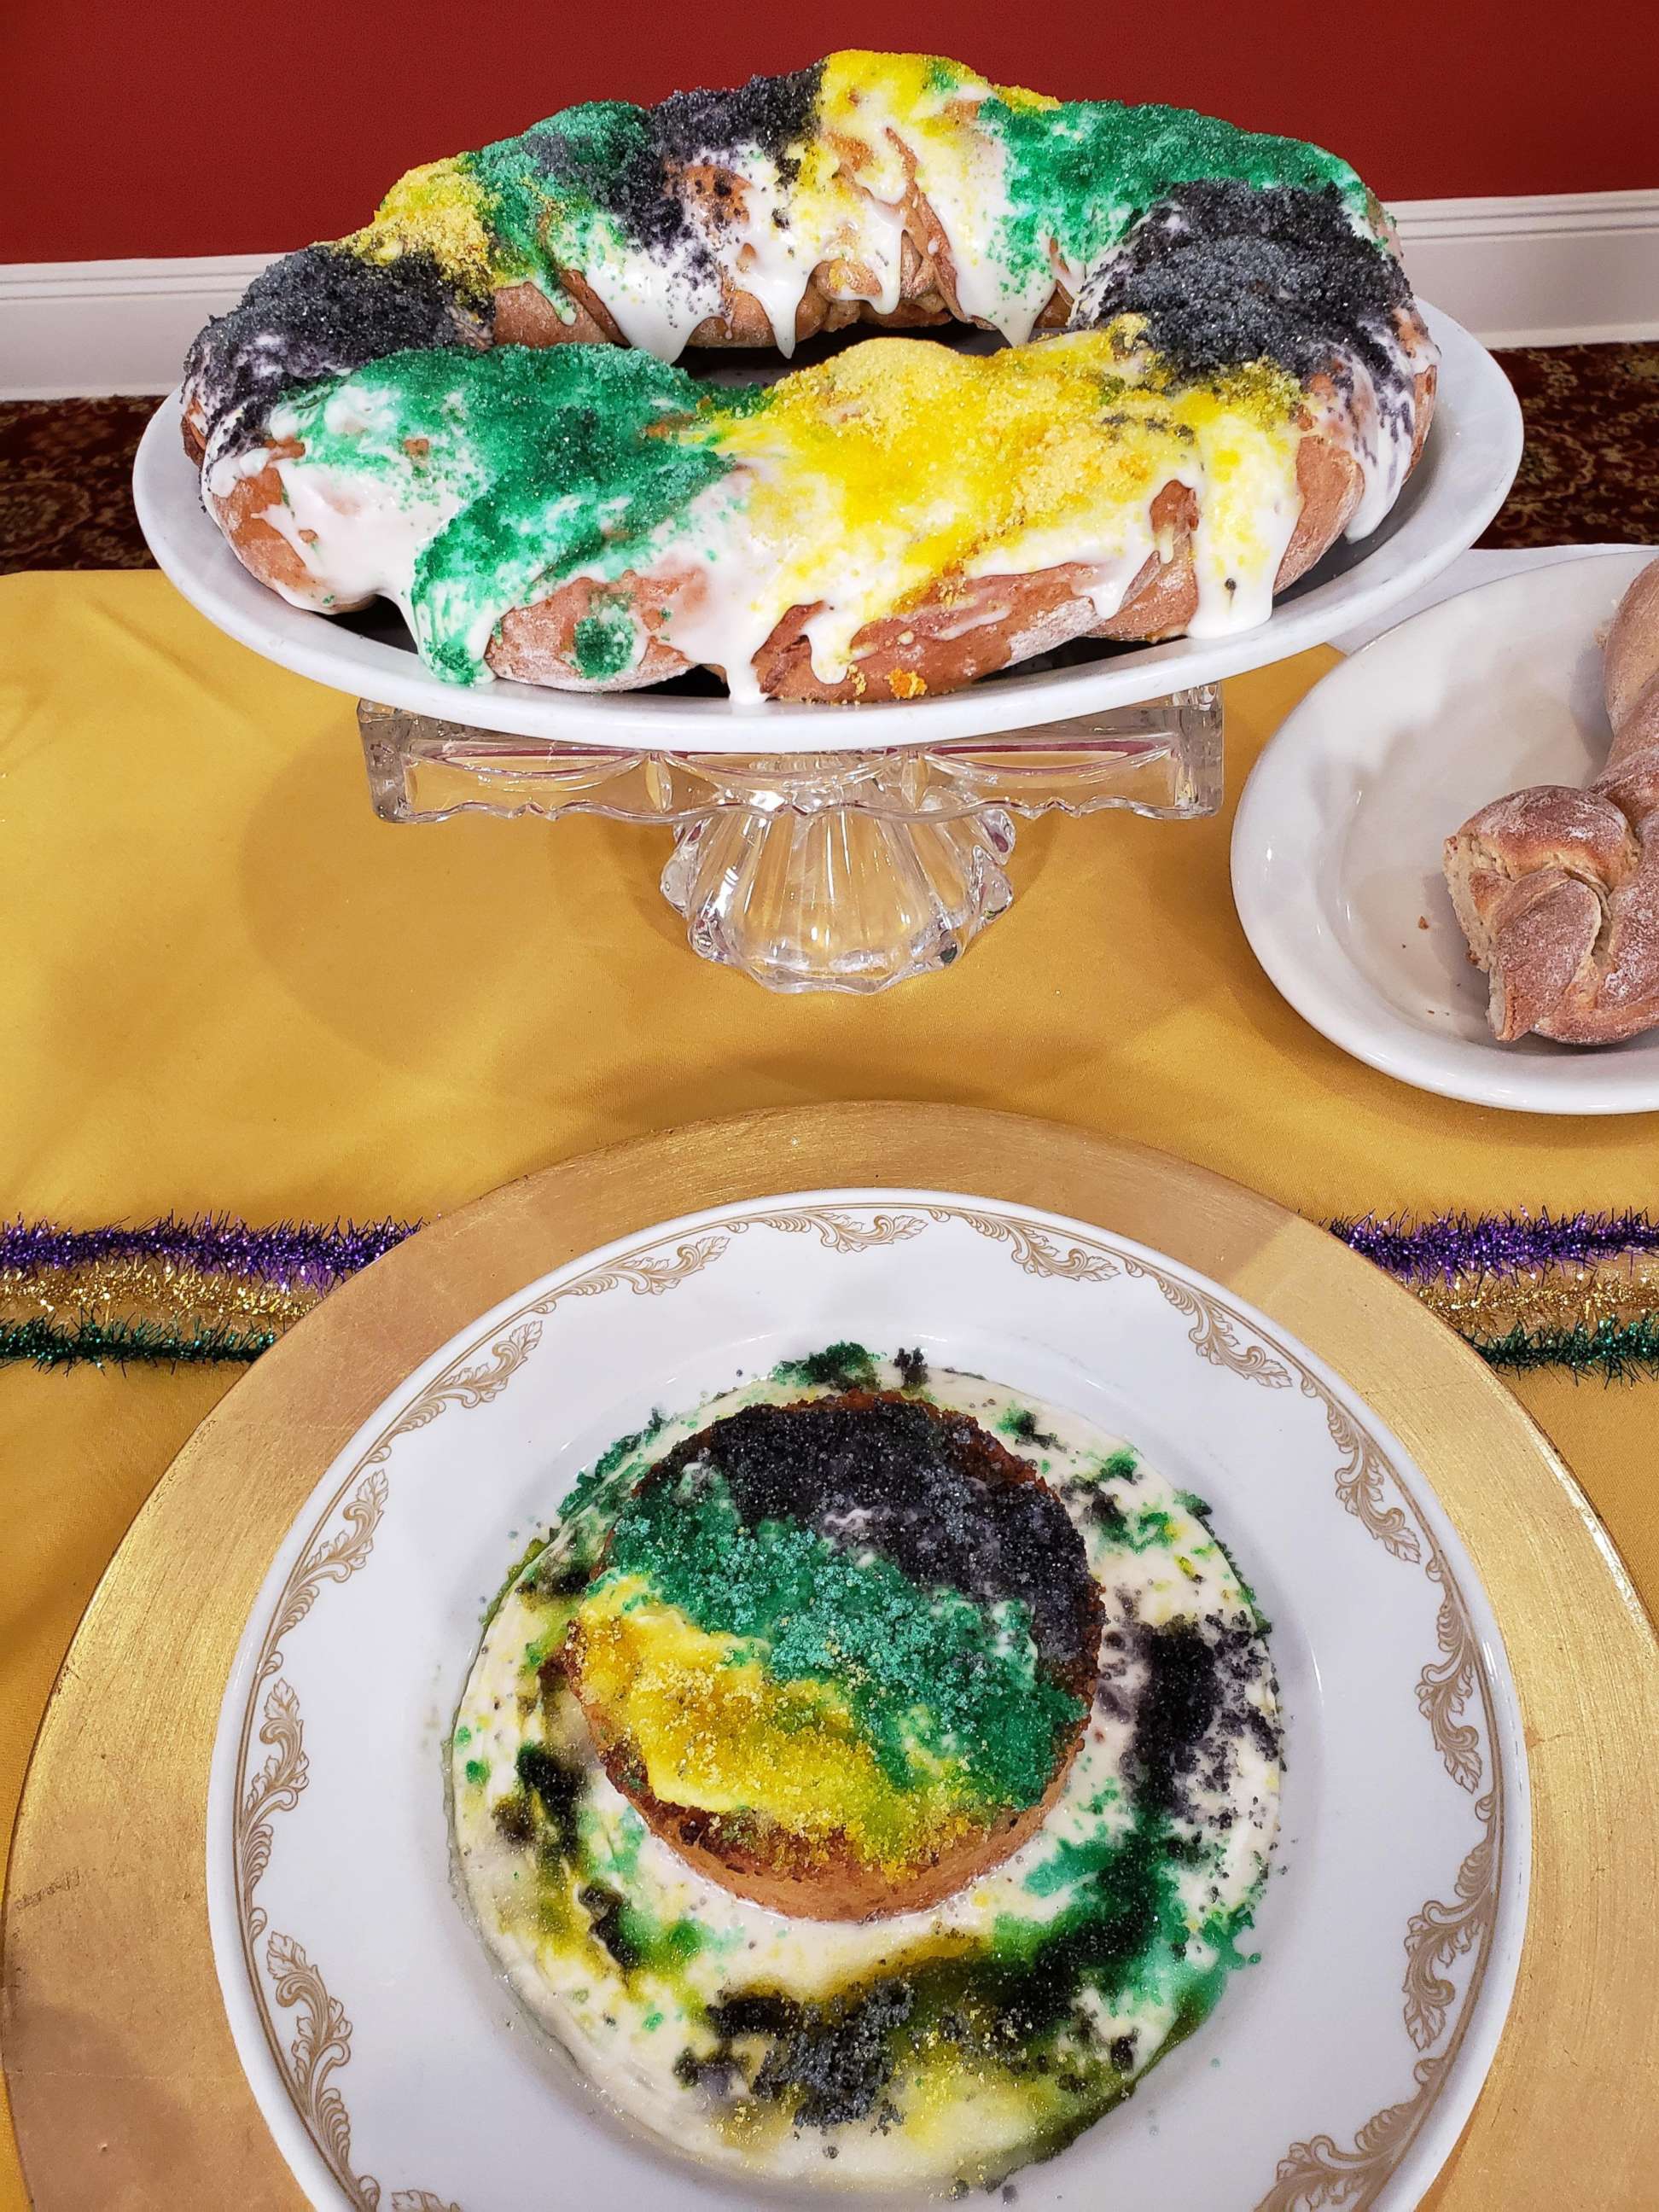 PHOTO: King cake and bread pudding from Dooky Chase's Restaurant in New Orleans.